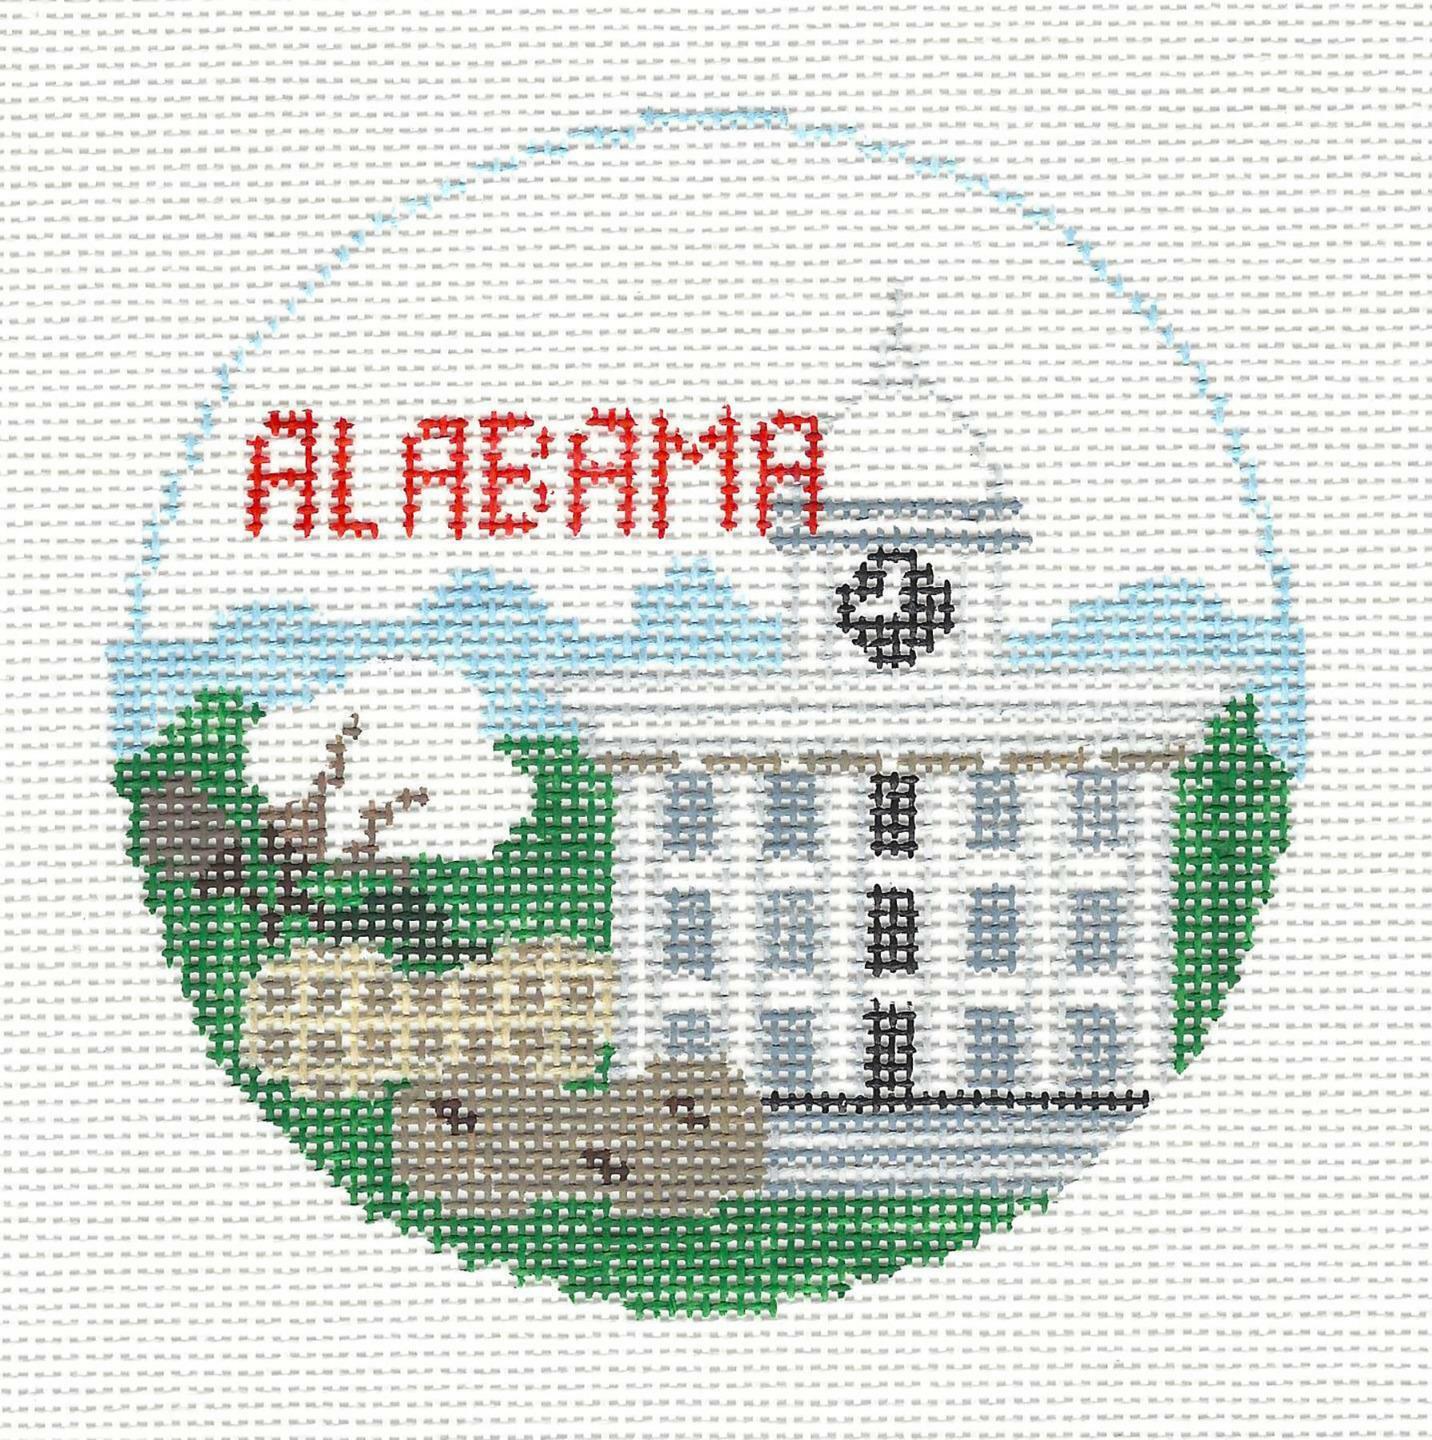 State of ALABAMA handpainted Needlepoint Ornament Canvas by Kathy Schenkel RD.